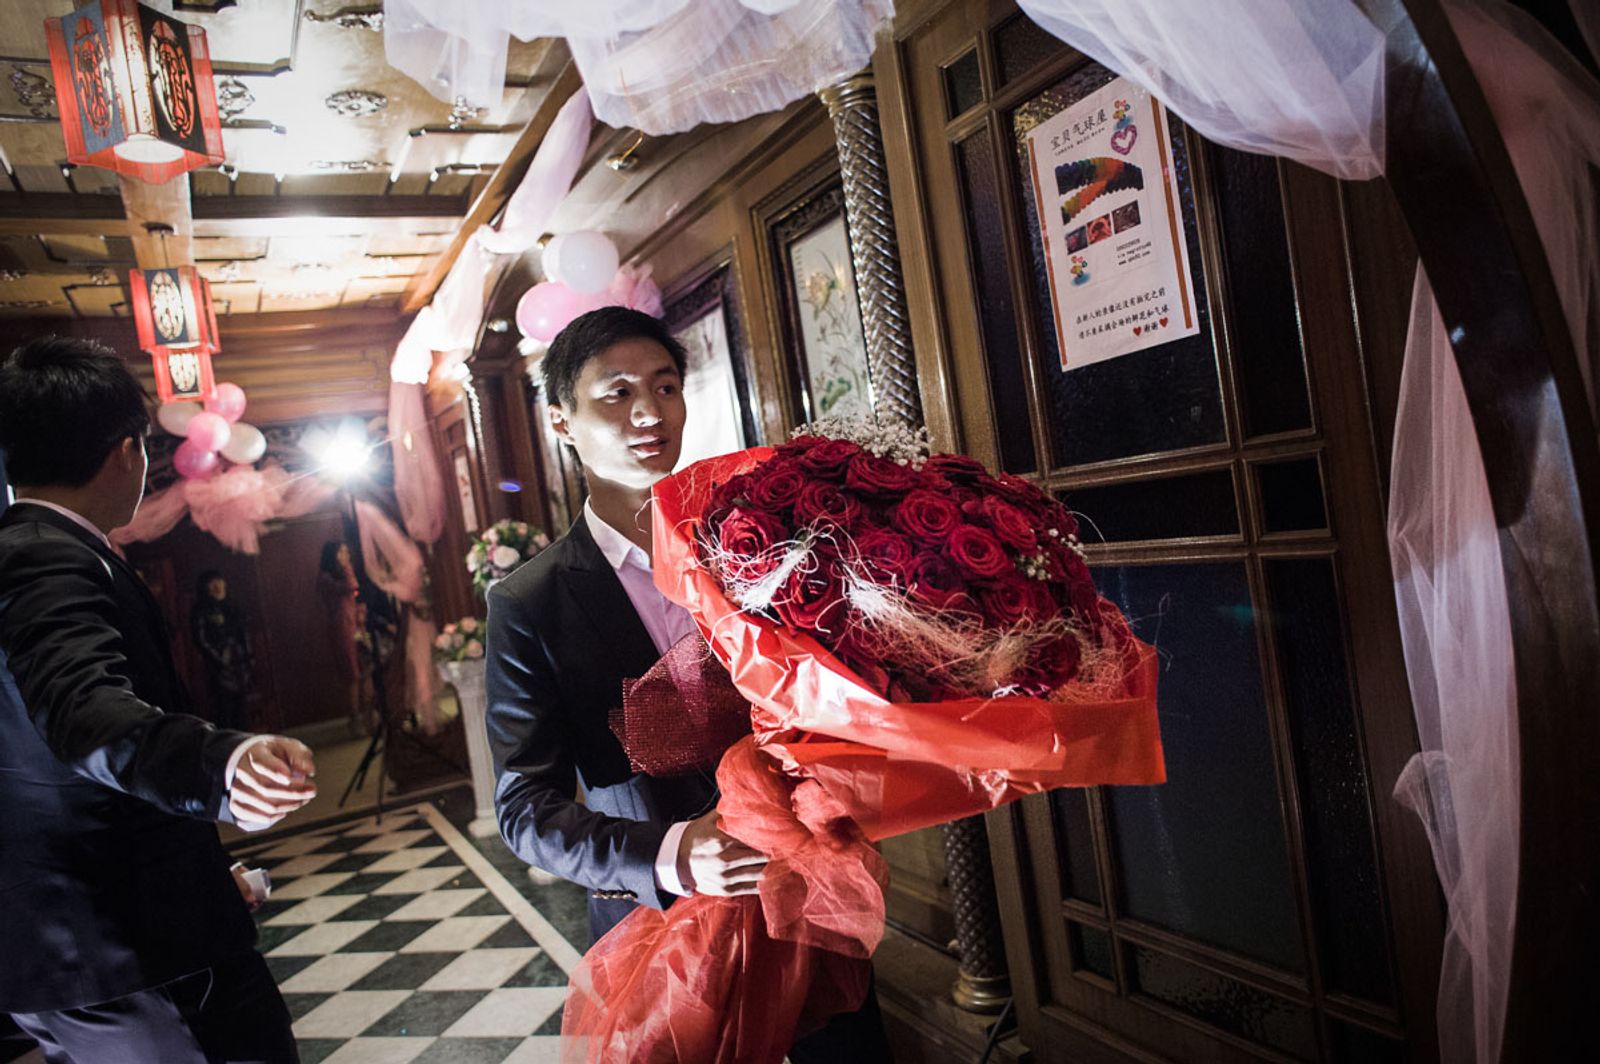 © Agnese Morganti - Prato, a big bunch of red roses is delivered for the bride to be during a Chinese engagement party